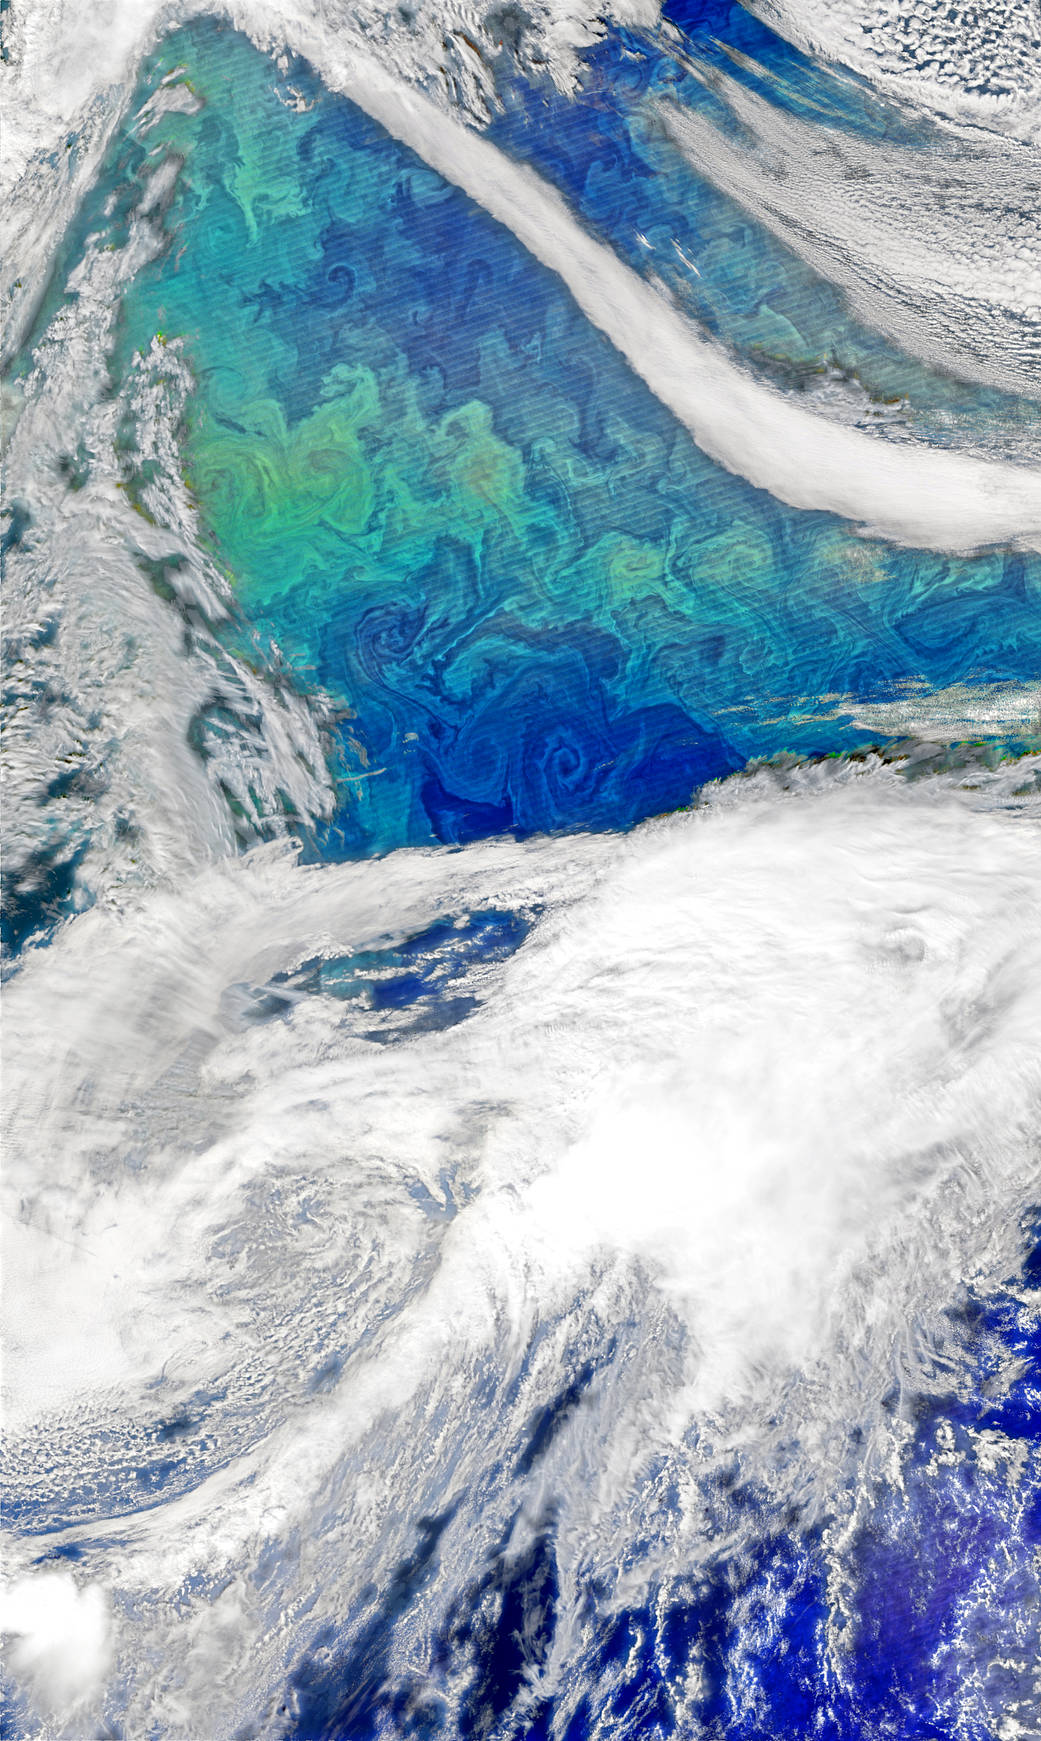 Bloom of phytoplankton in Atlantic imaged by satellite with clouds below and surrounding